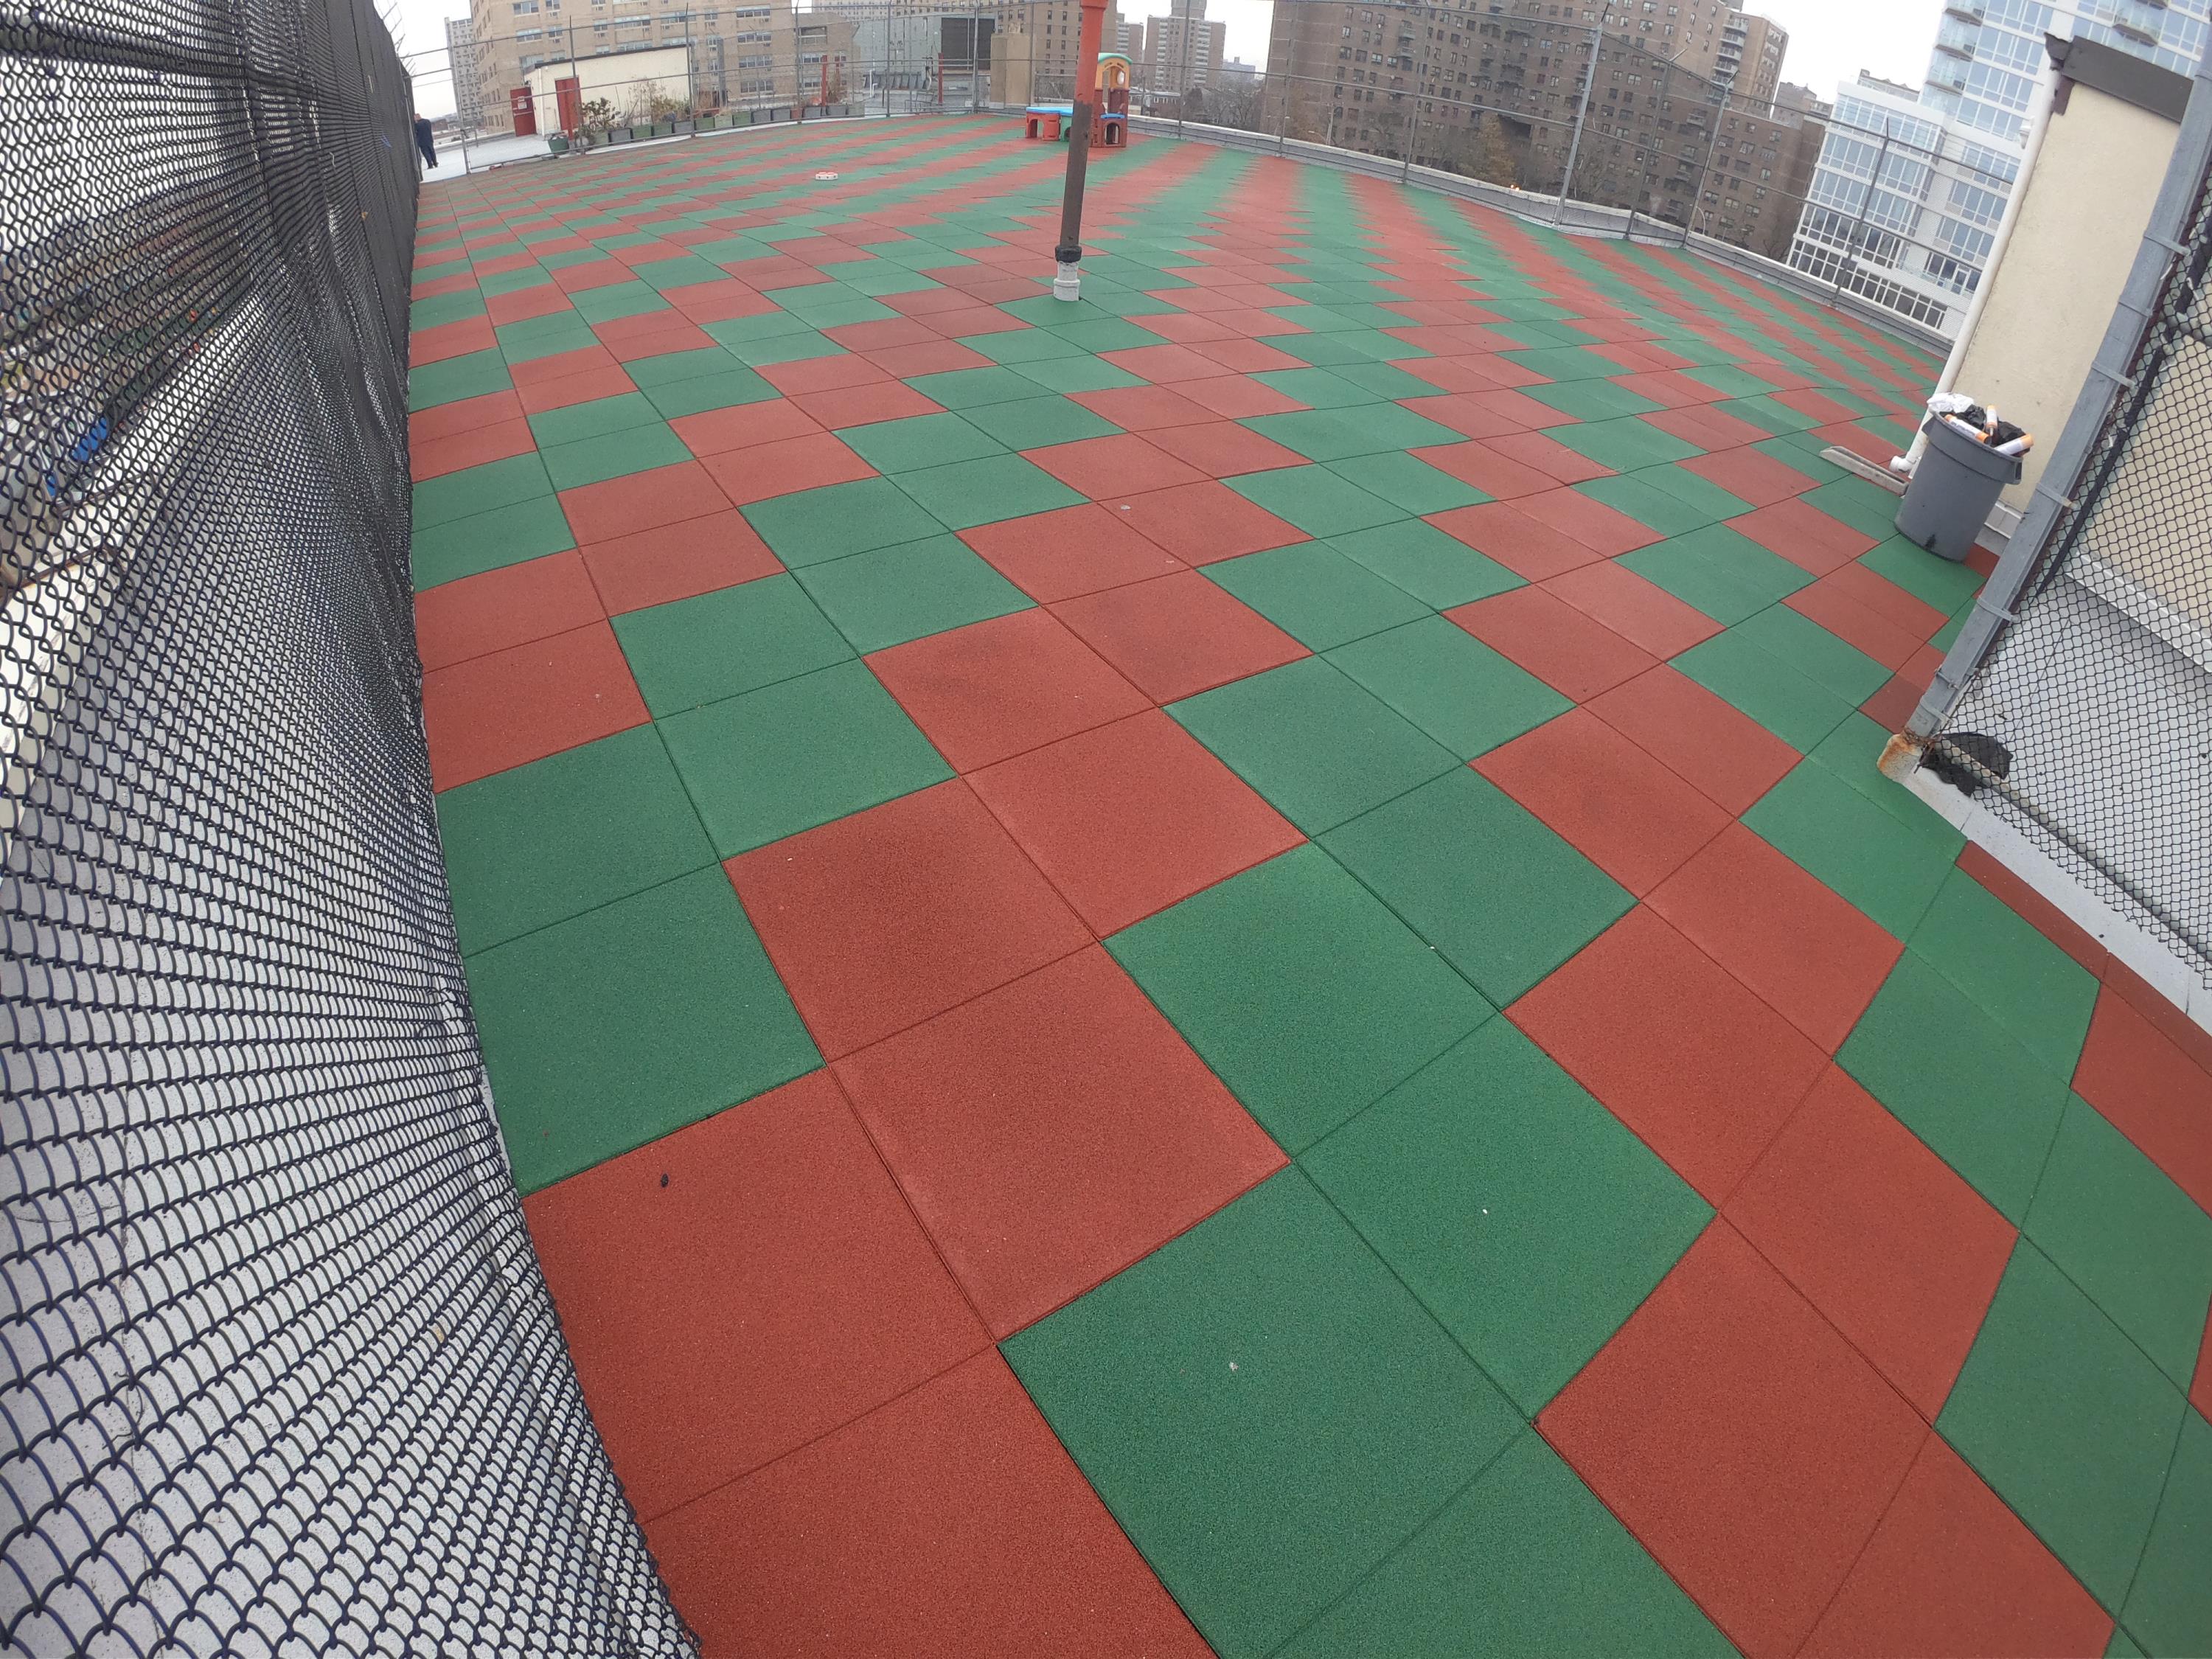 UNITY SURFACING at PAL School Rooftop Playground Tiles j